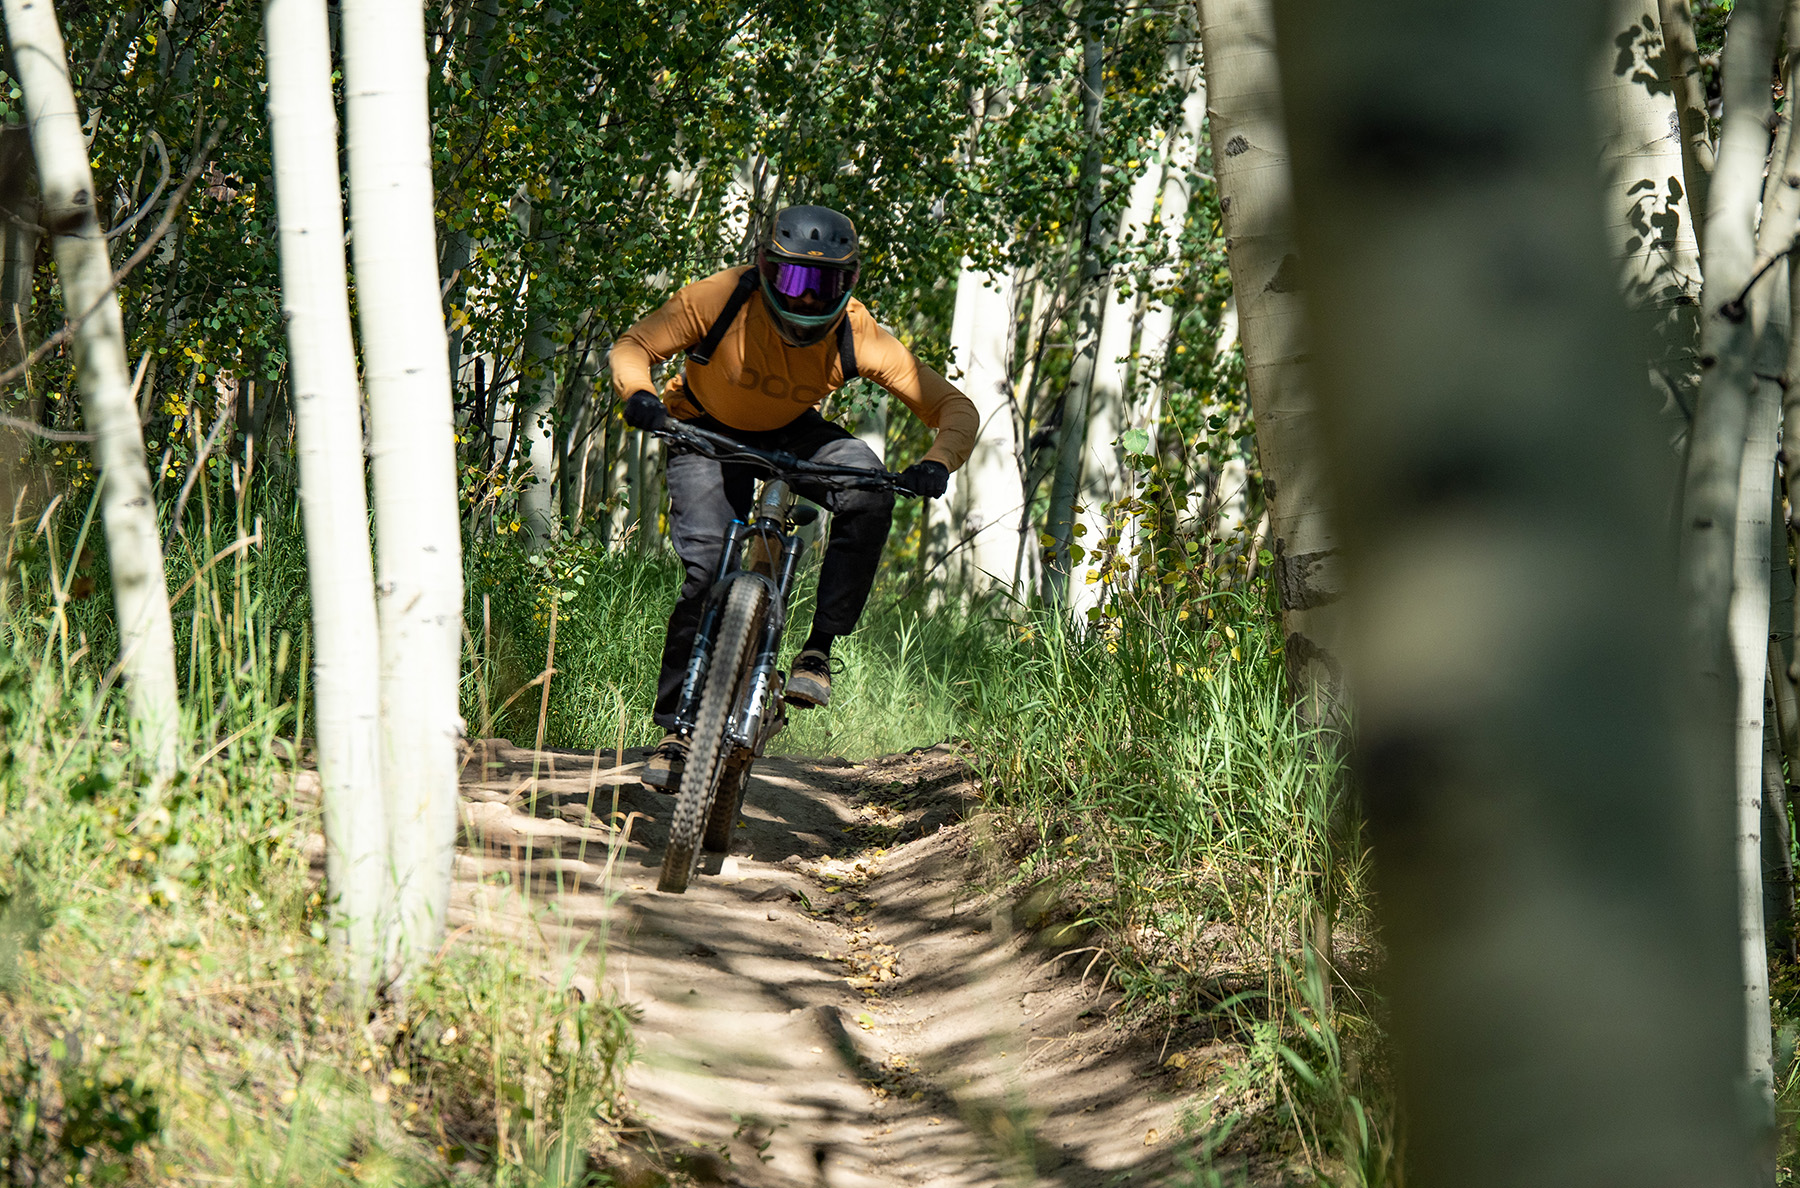 Eric Freson and Dylan Wood review the Intense Tracer 279 for Blister